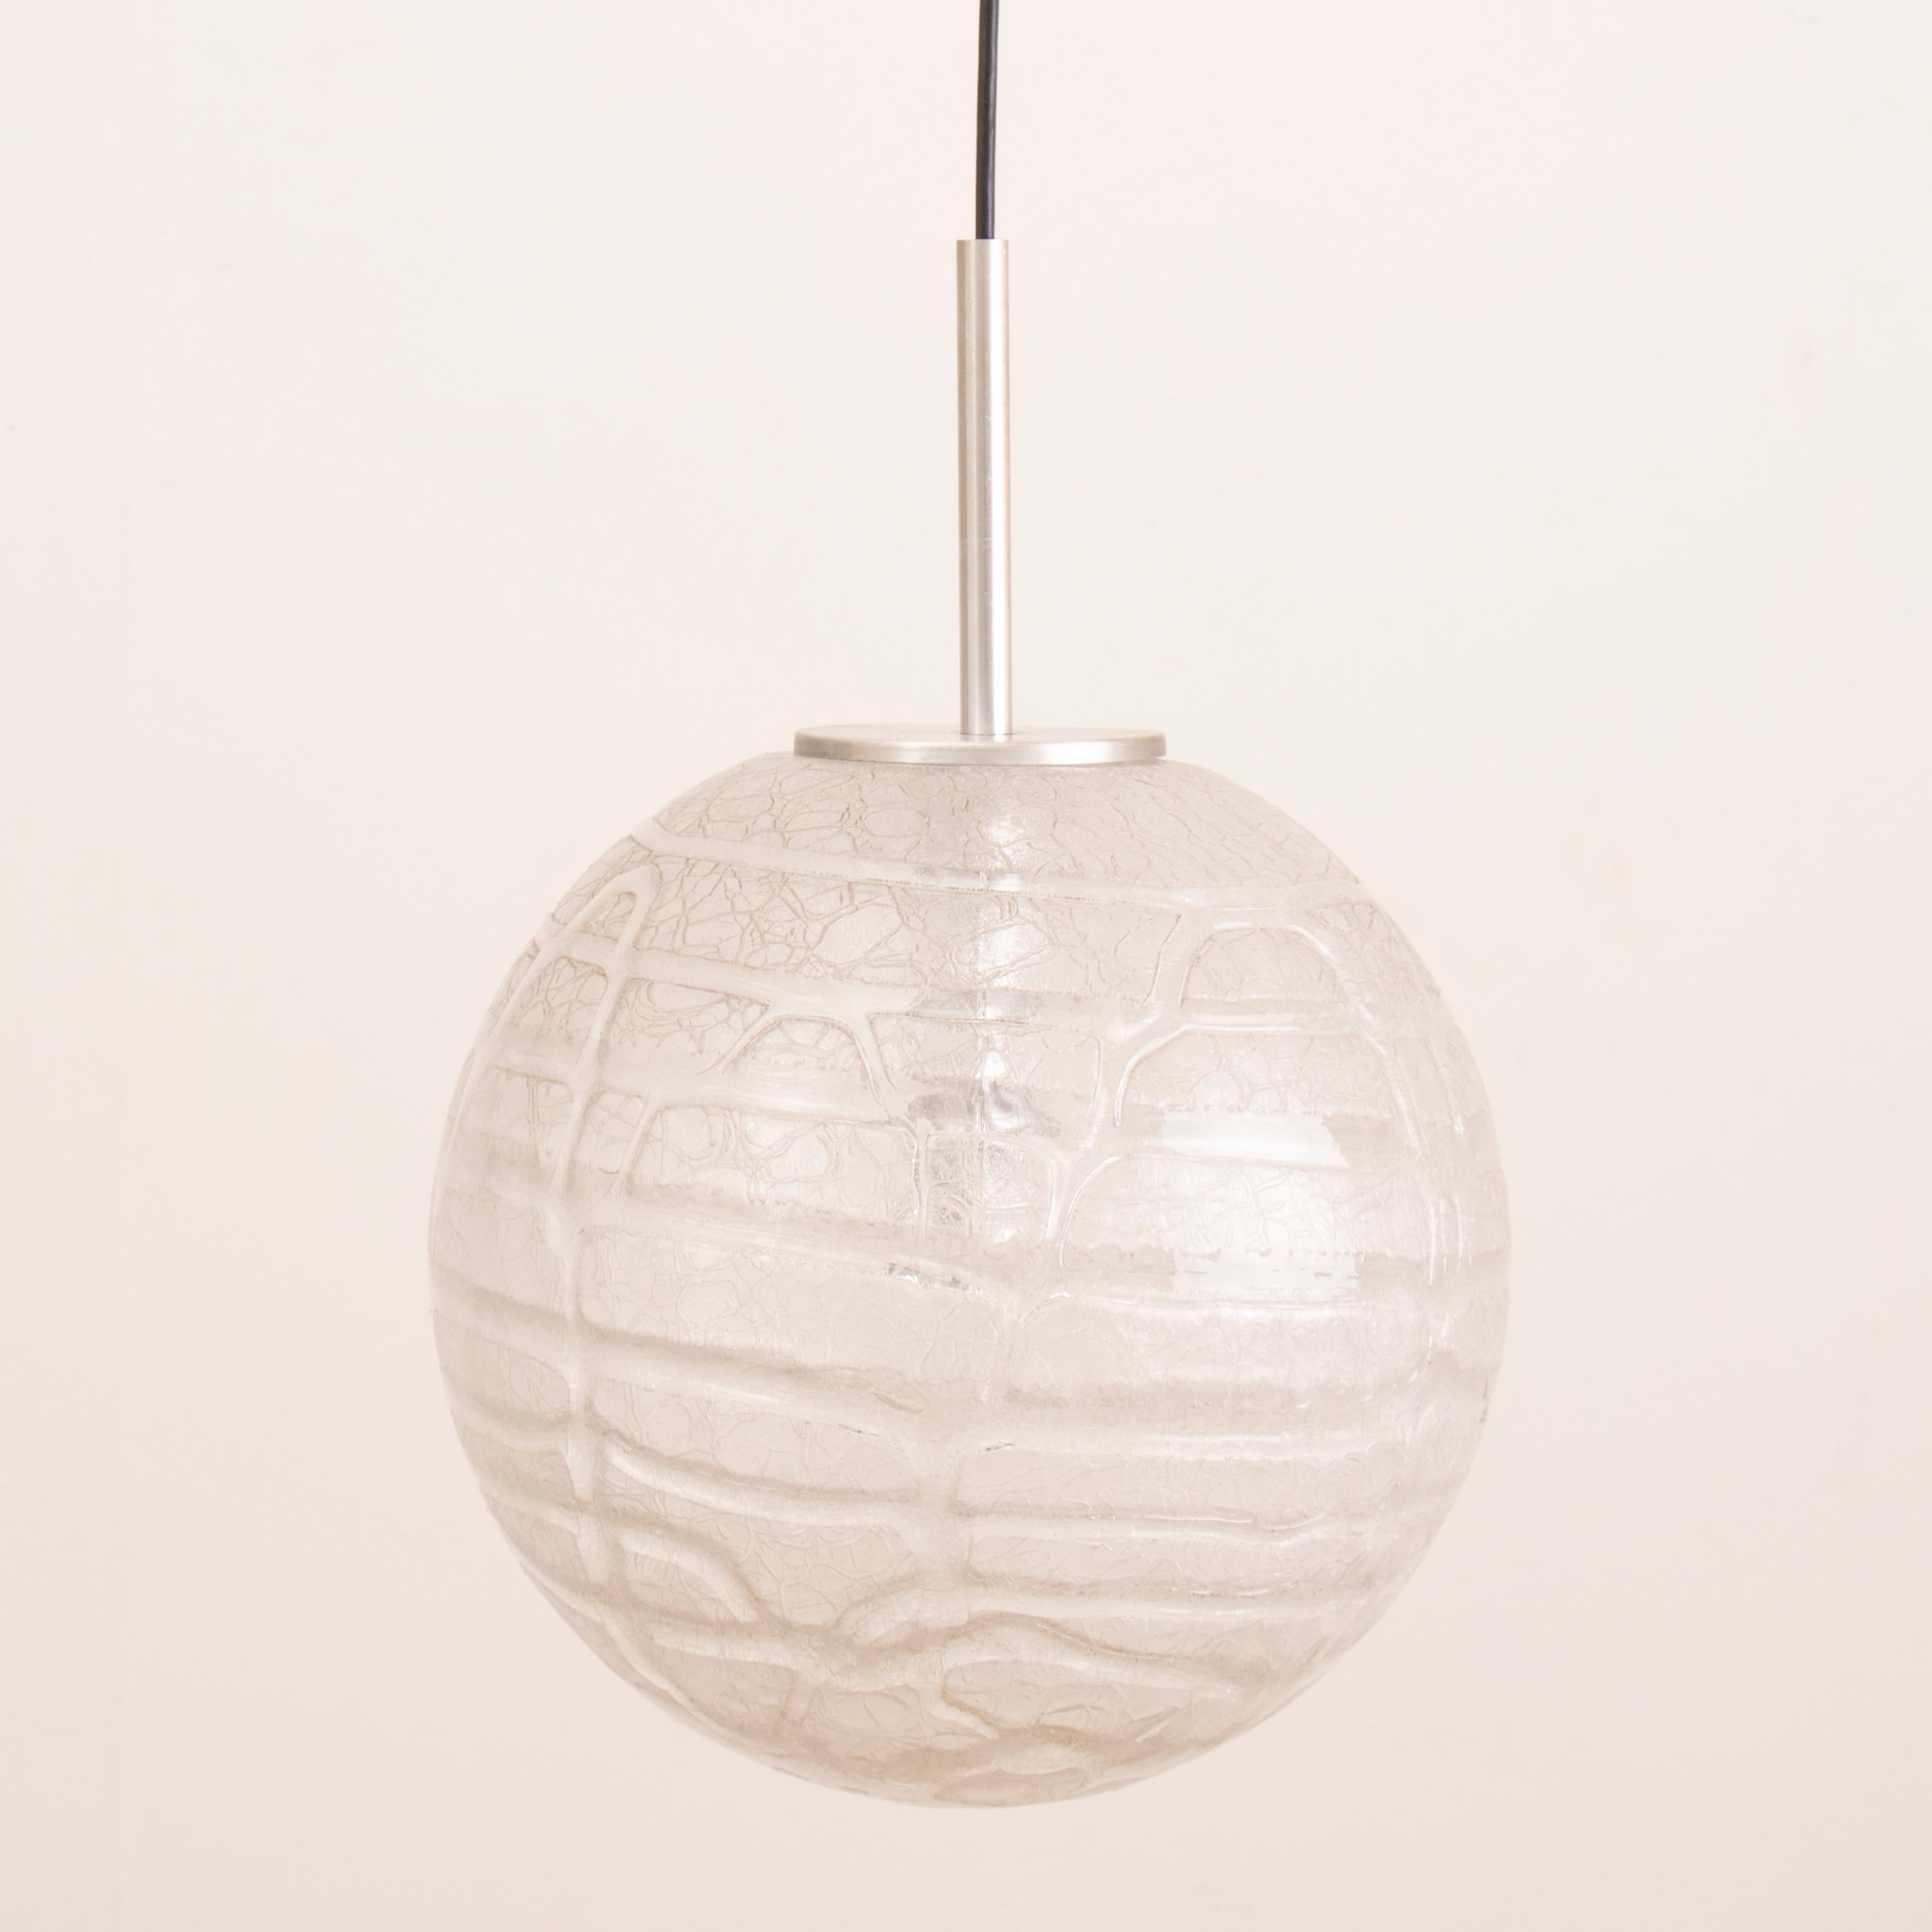 1970s globe, crackle, frosted, glass, pendant, hanging-light manufactured by Doria Leuchten, Germany. The glass globe is suspended from a polished chrome fixture and black wire flex which can be adjusted to your specific height requirements. A black